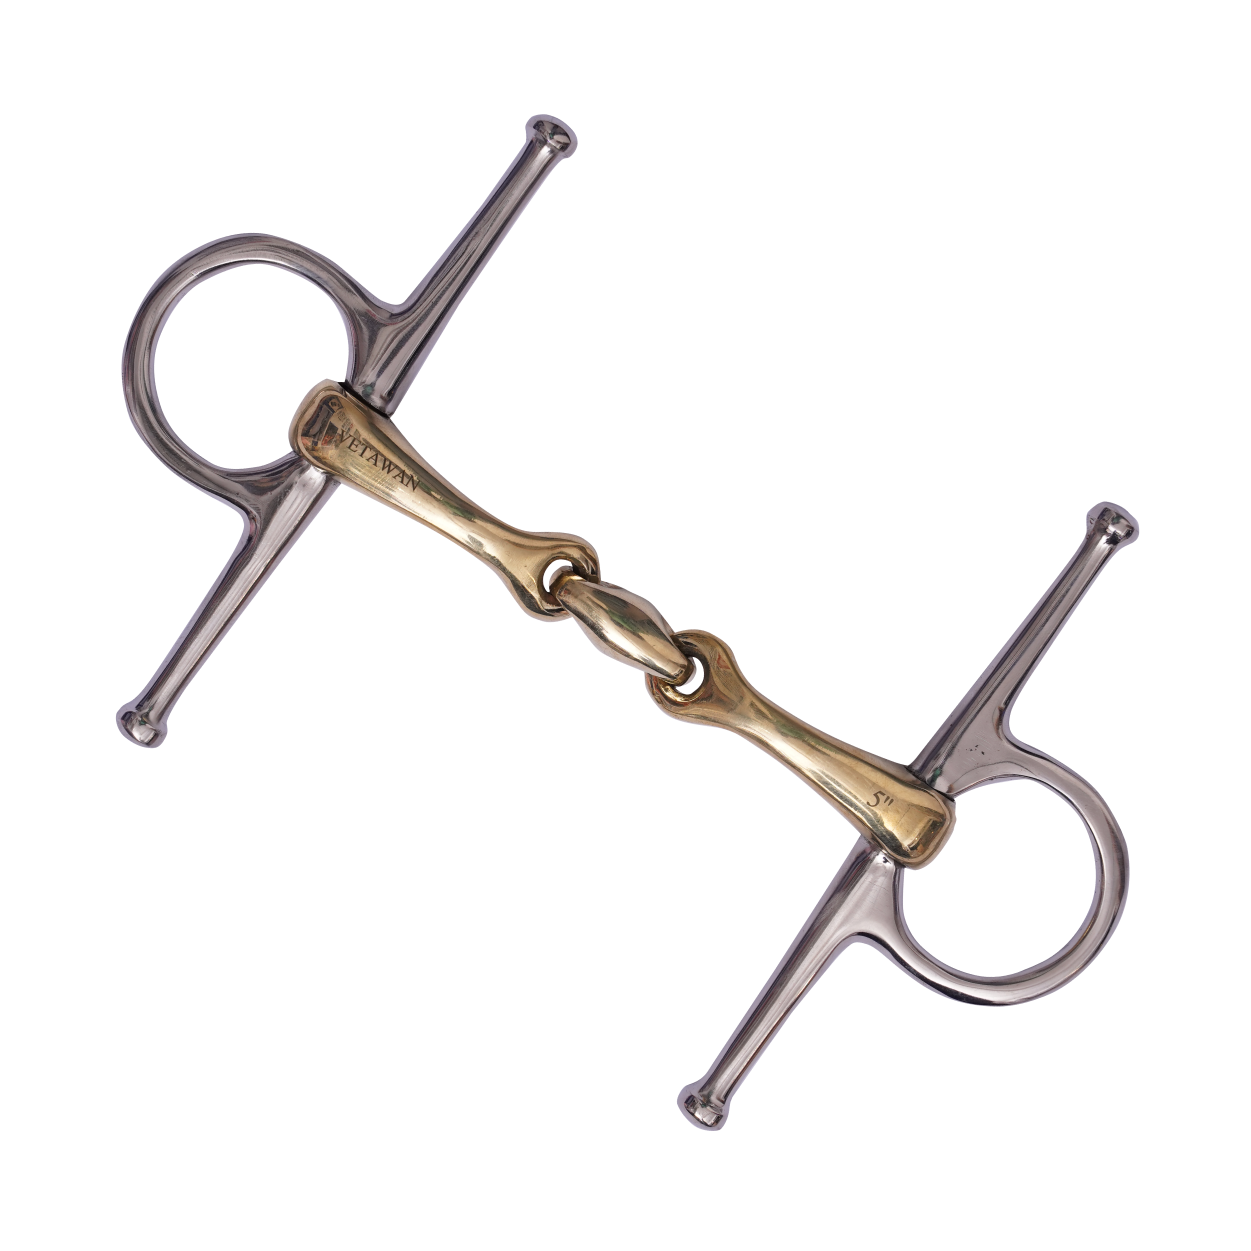 Full Cheek Curved sweet copper Snaffle Bit with Lozenge